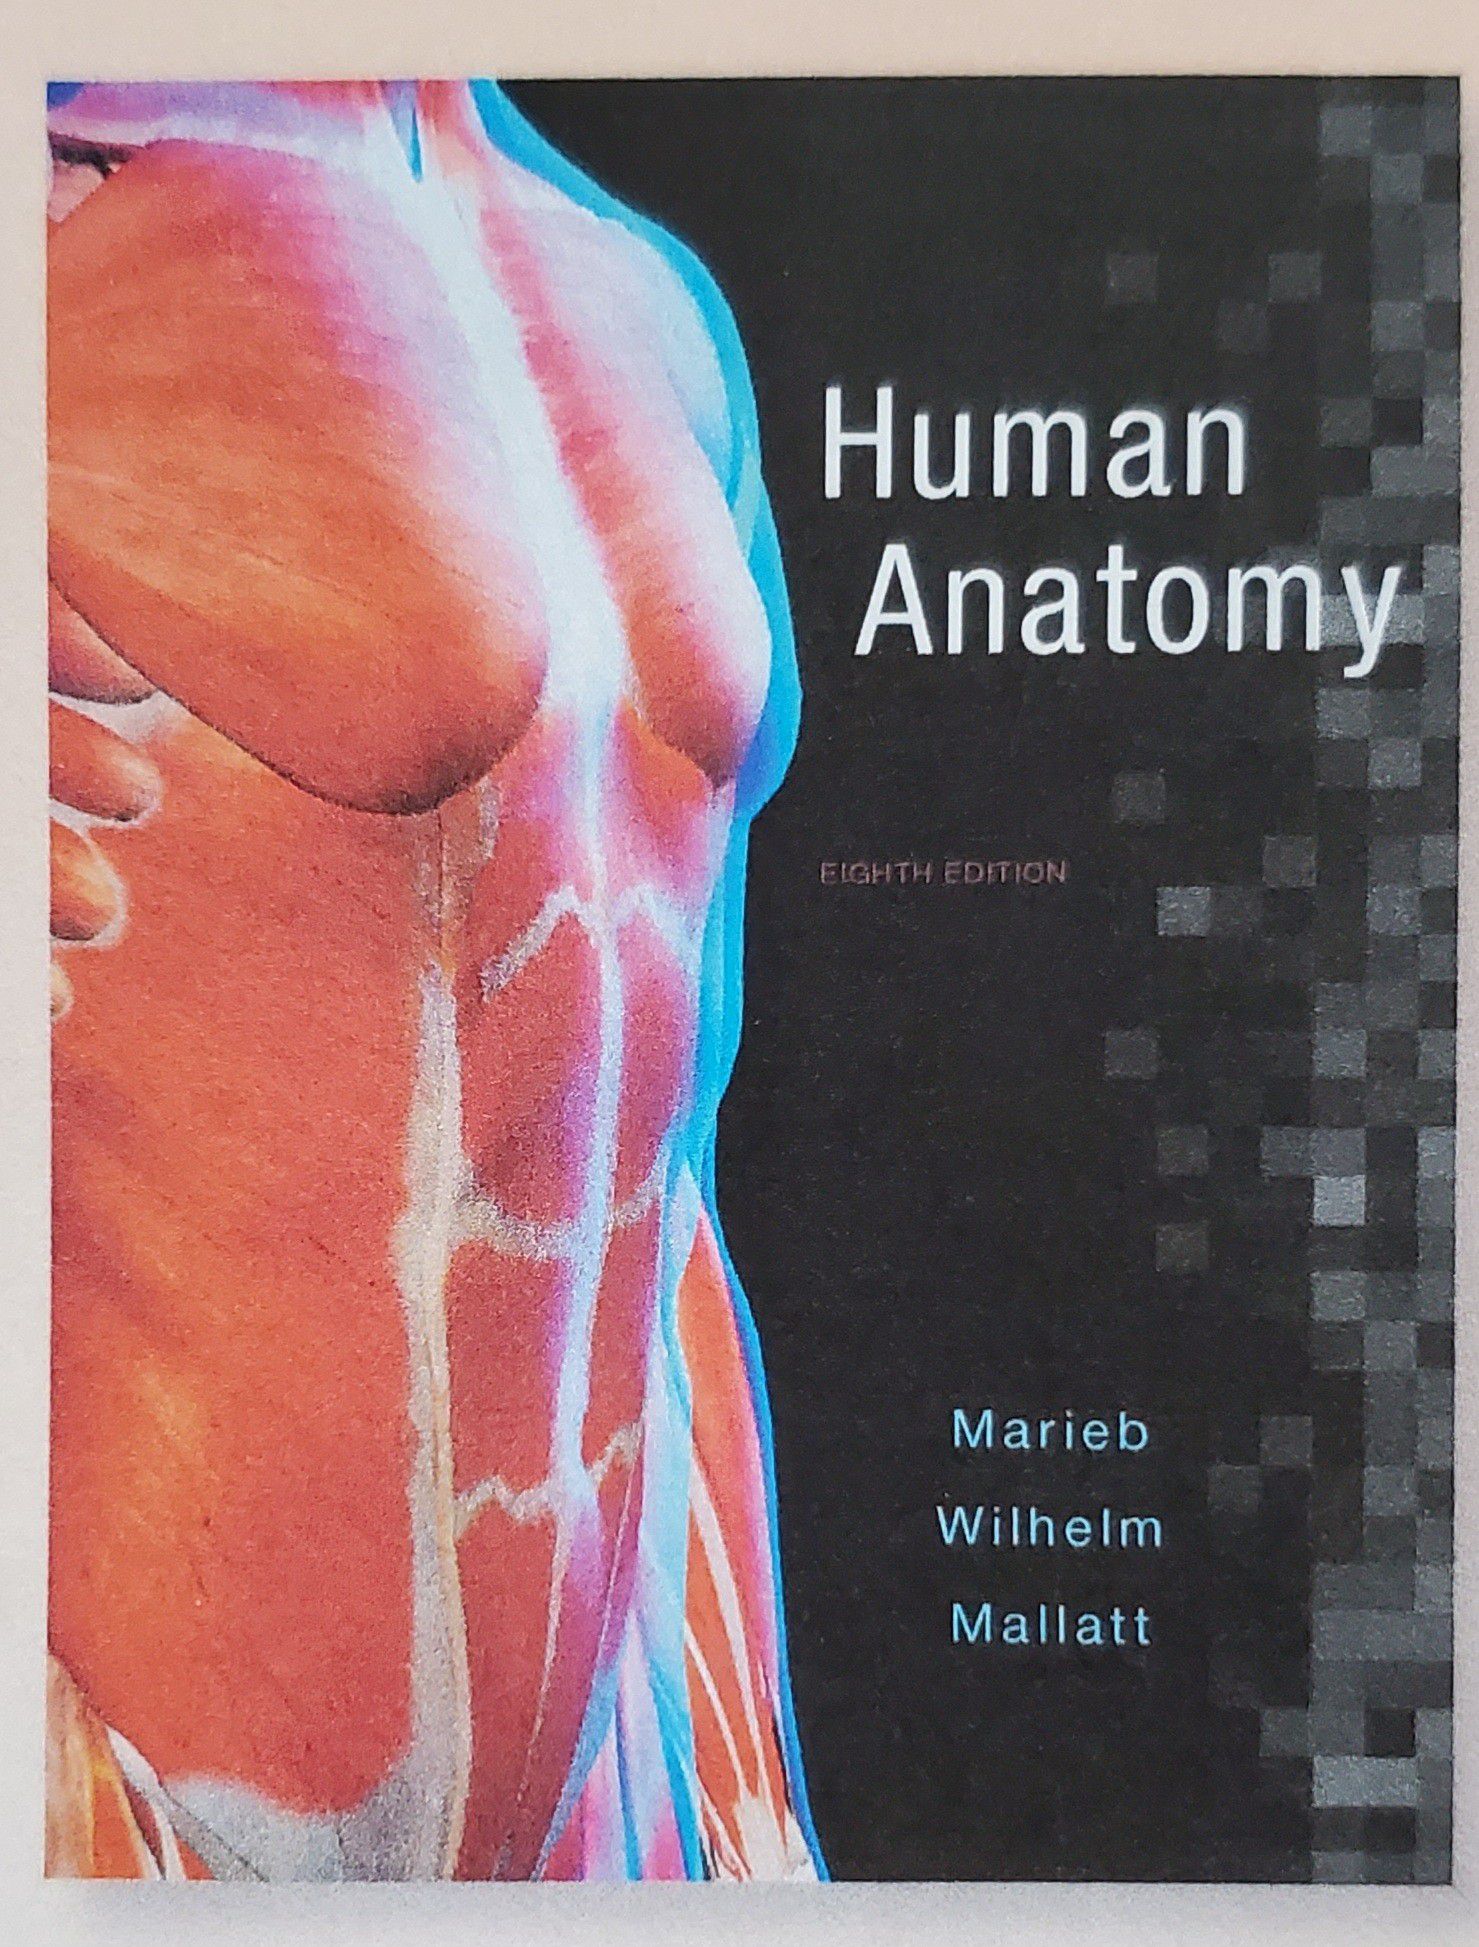 Human Anatomy, 8th edition Textbook + Access Code + Practice Anatomy Lab 3.0 Disk